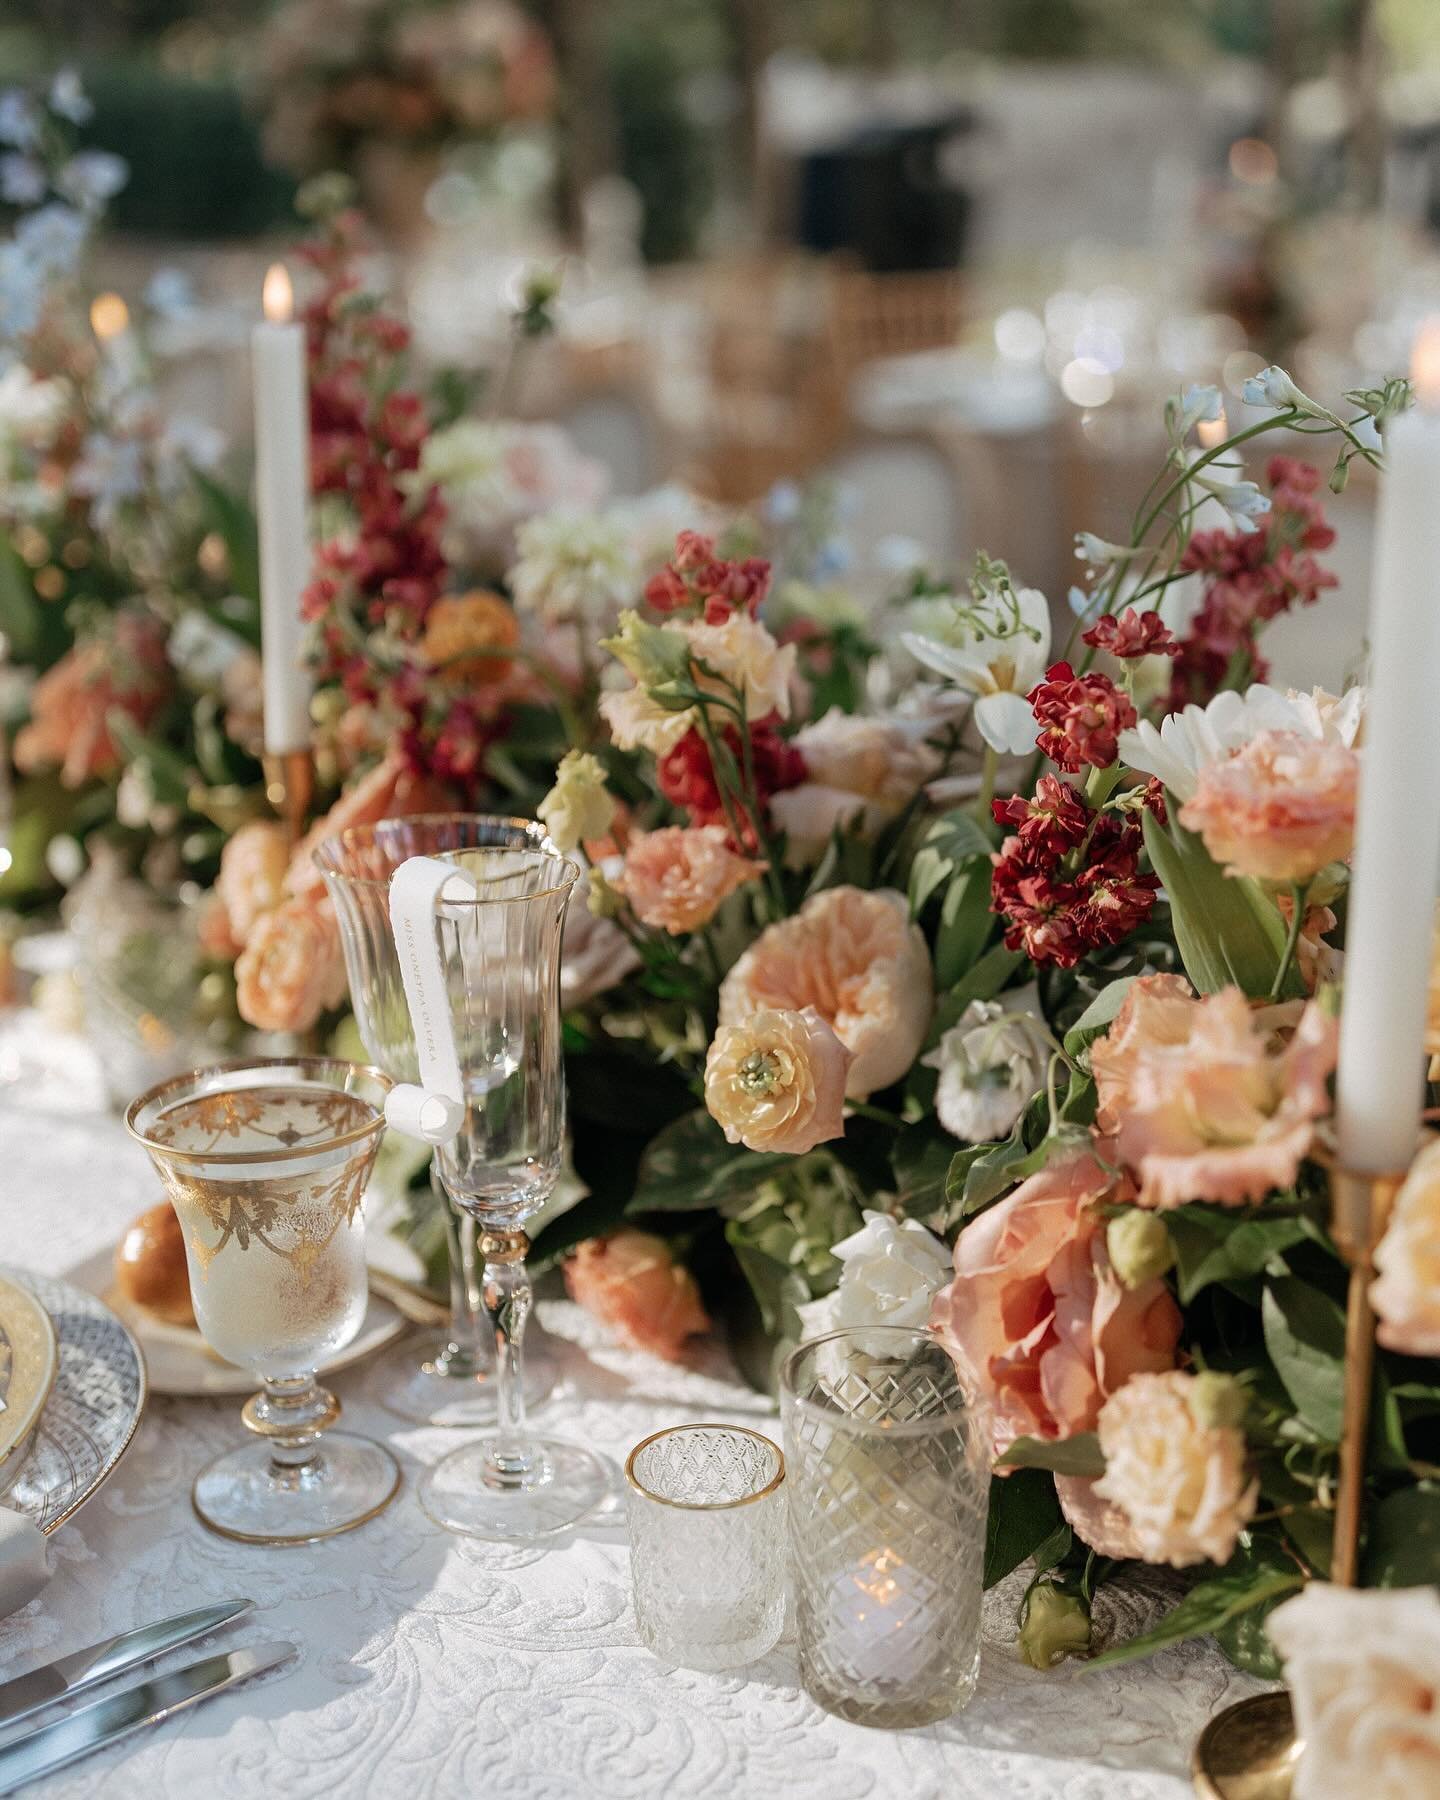 Impossible not to share these details on the feed every few months because I still dream about them and you should too! 

Vendors:
Couple: @sing.squared &amp; @chris.ron.factoriza 
Planning:&nbsp;@aliceandapricot
Photo/Video:&nbsp;@markandjenna_
Co-c